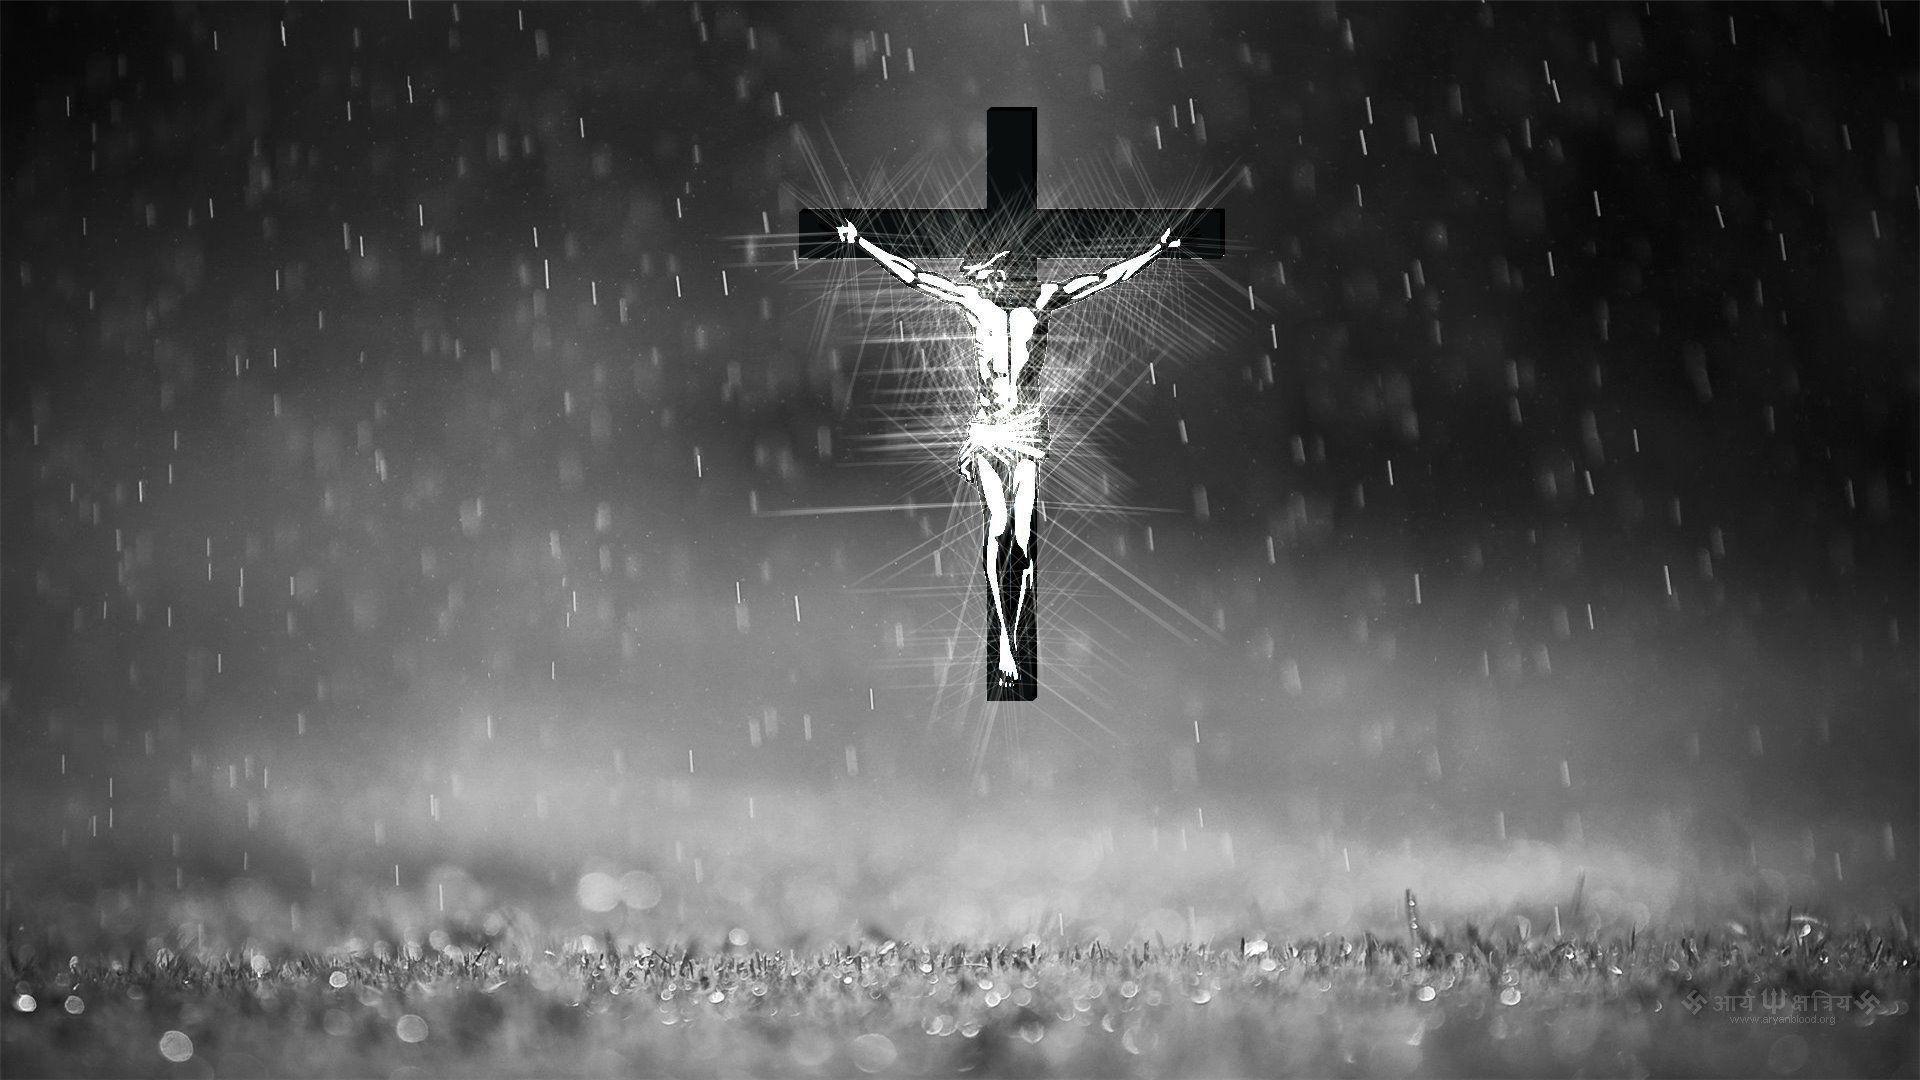 200 Pics Of The Free Cross Black And White Stock Photos Pictures   RoyaltyFree Images  iStock